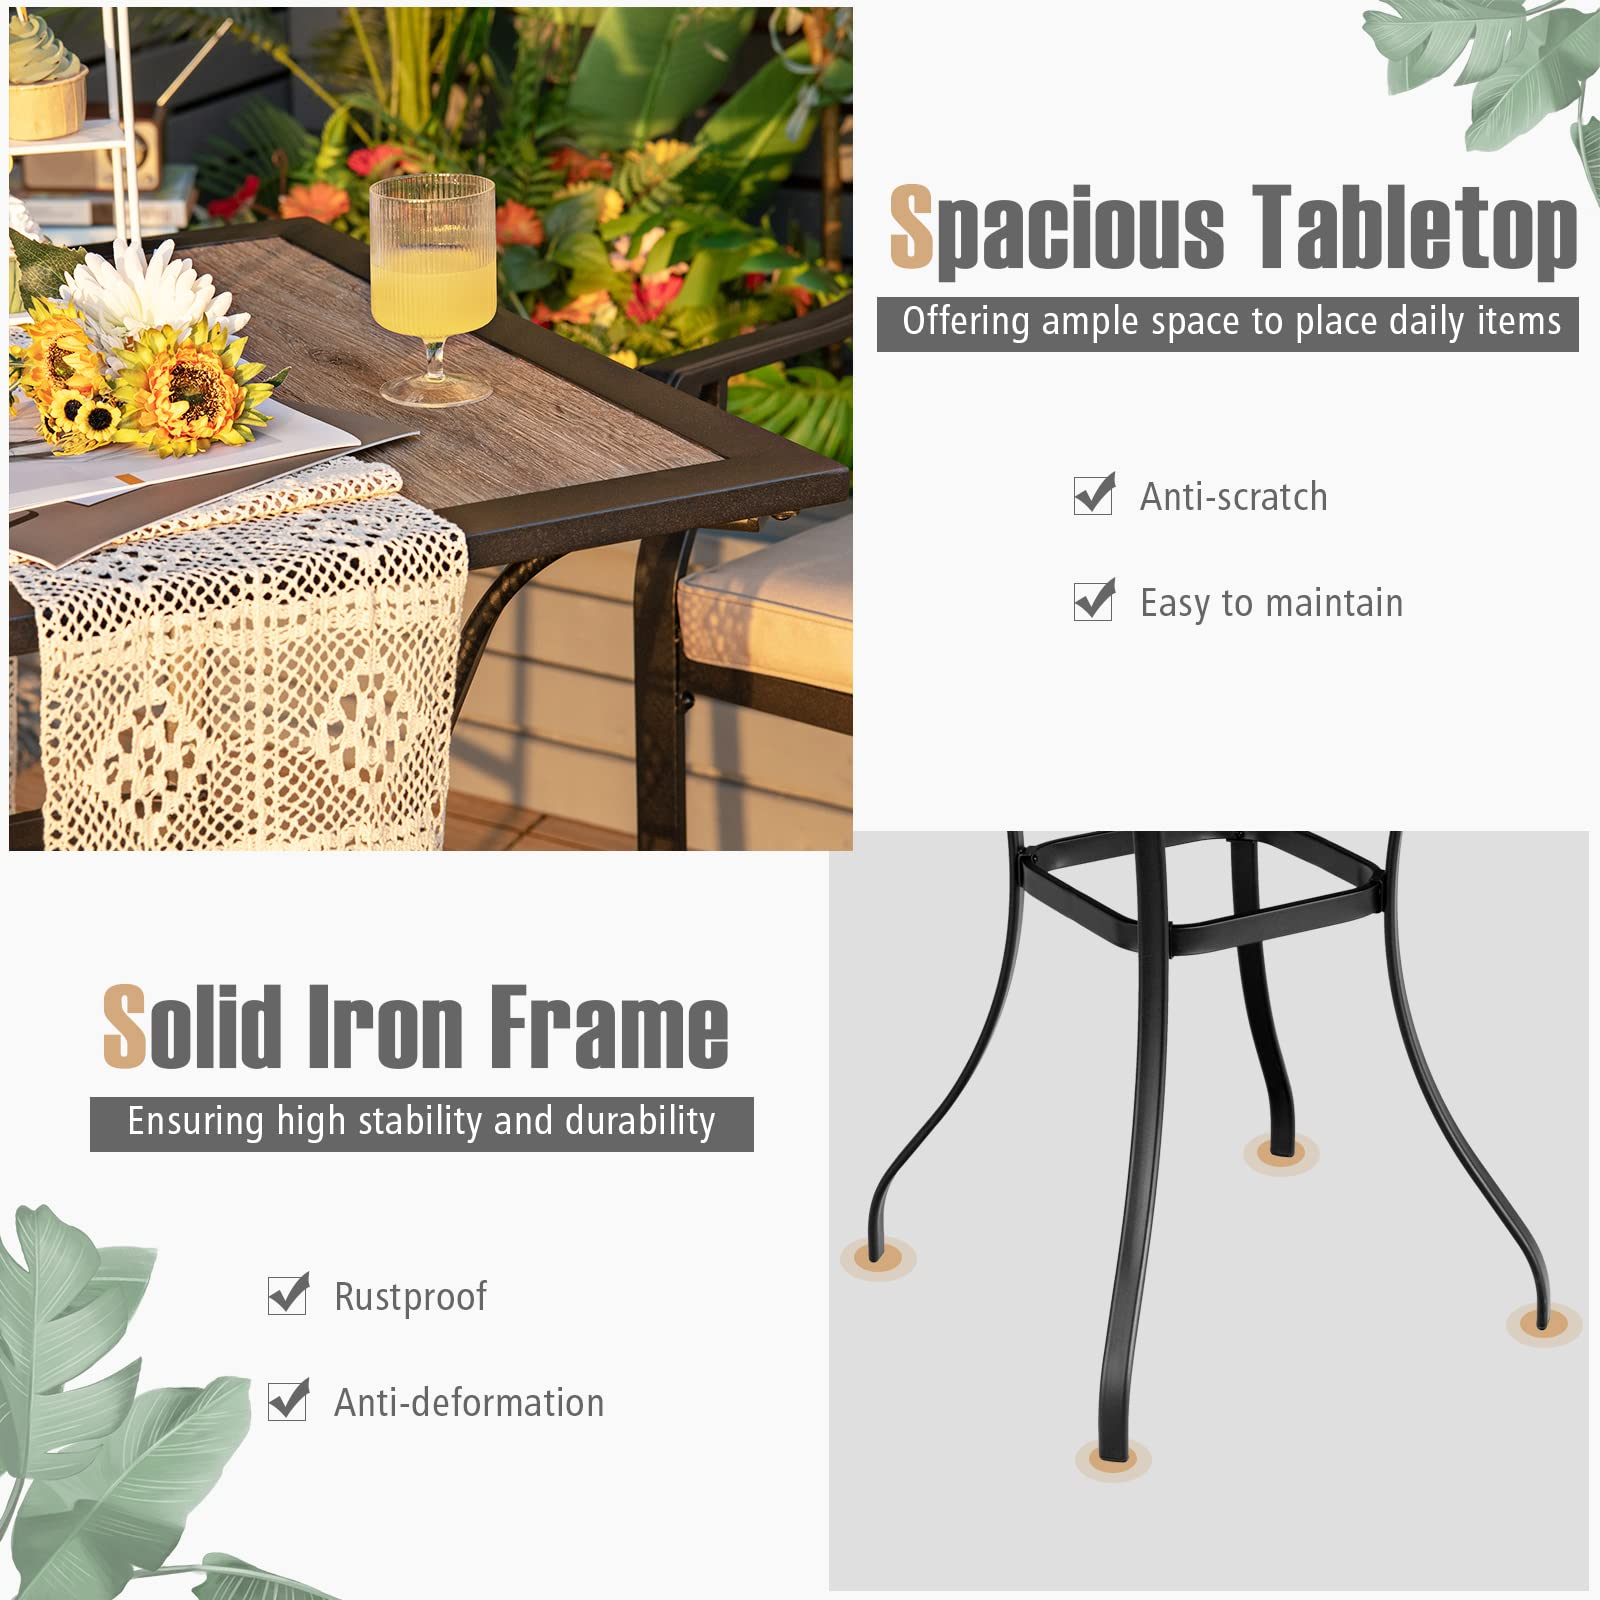 Patio Bar Table Outdoor Square Bistro Bar High Table